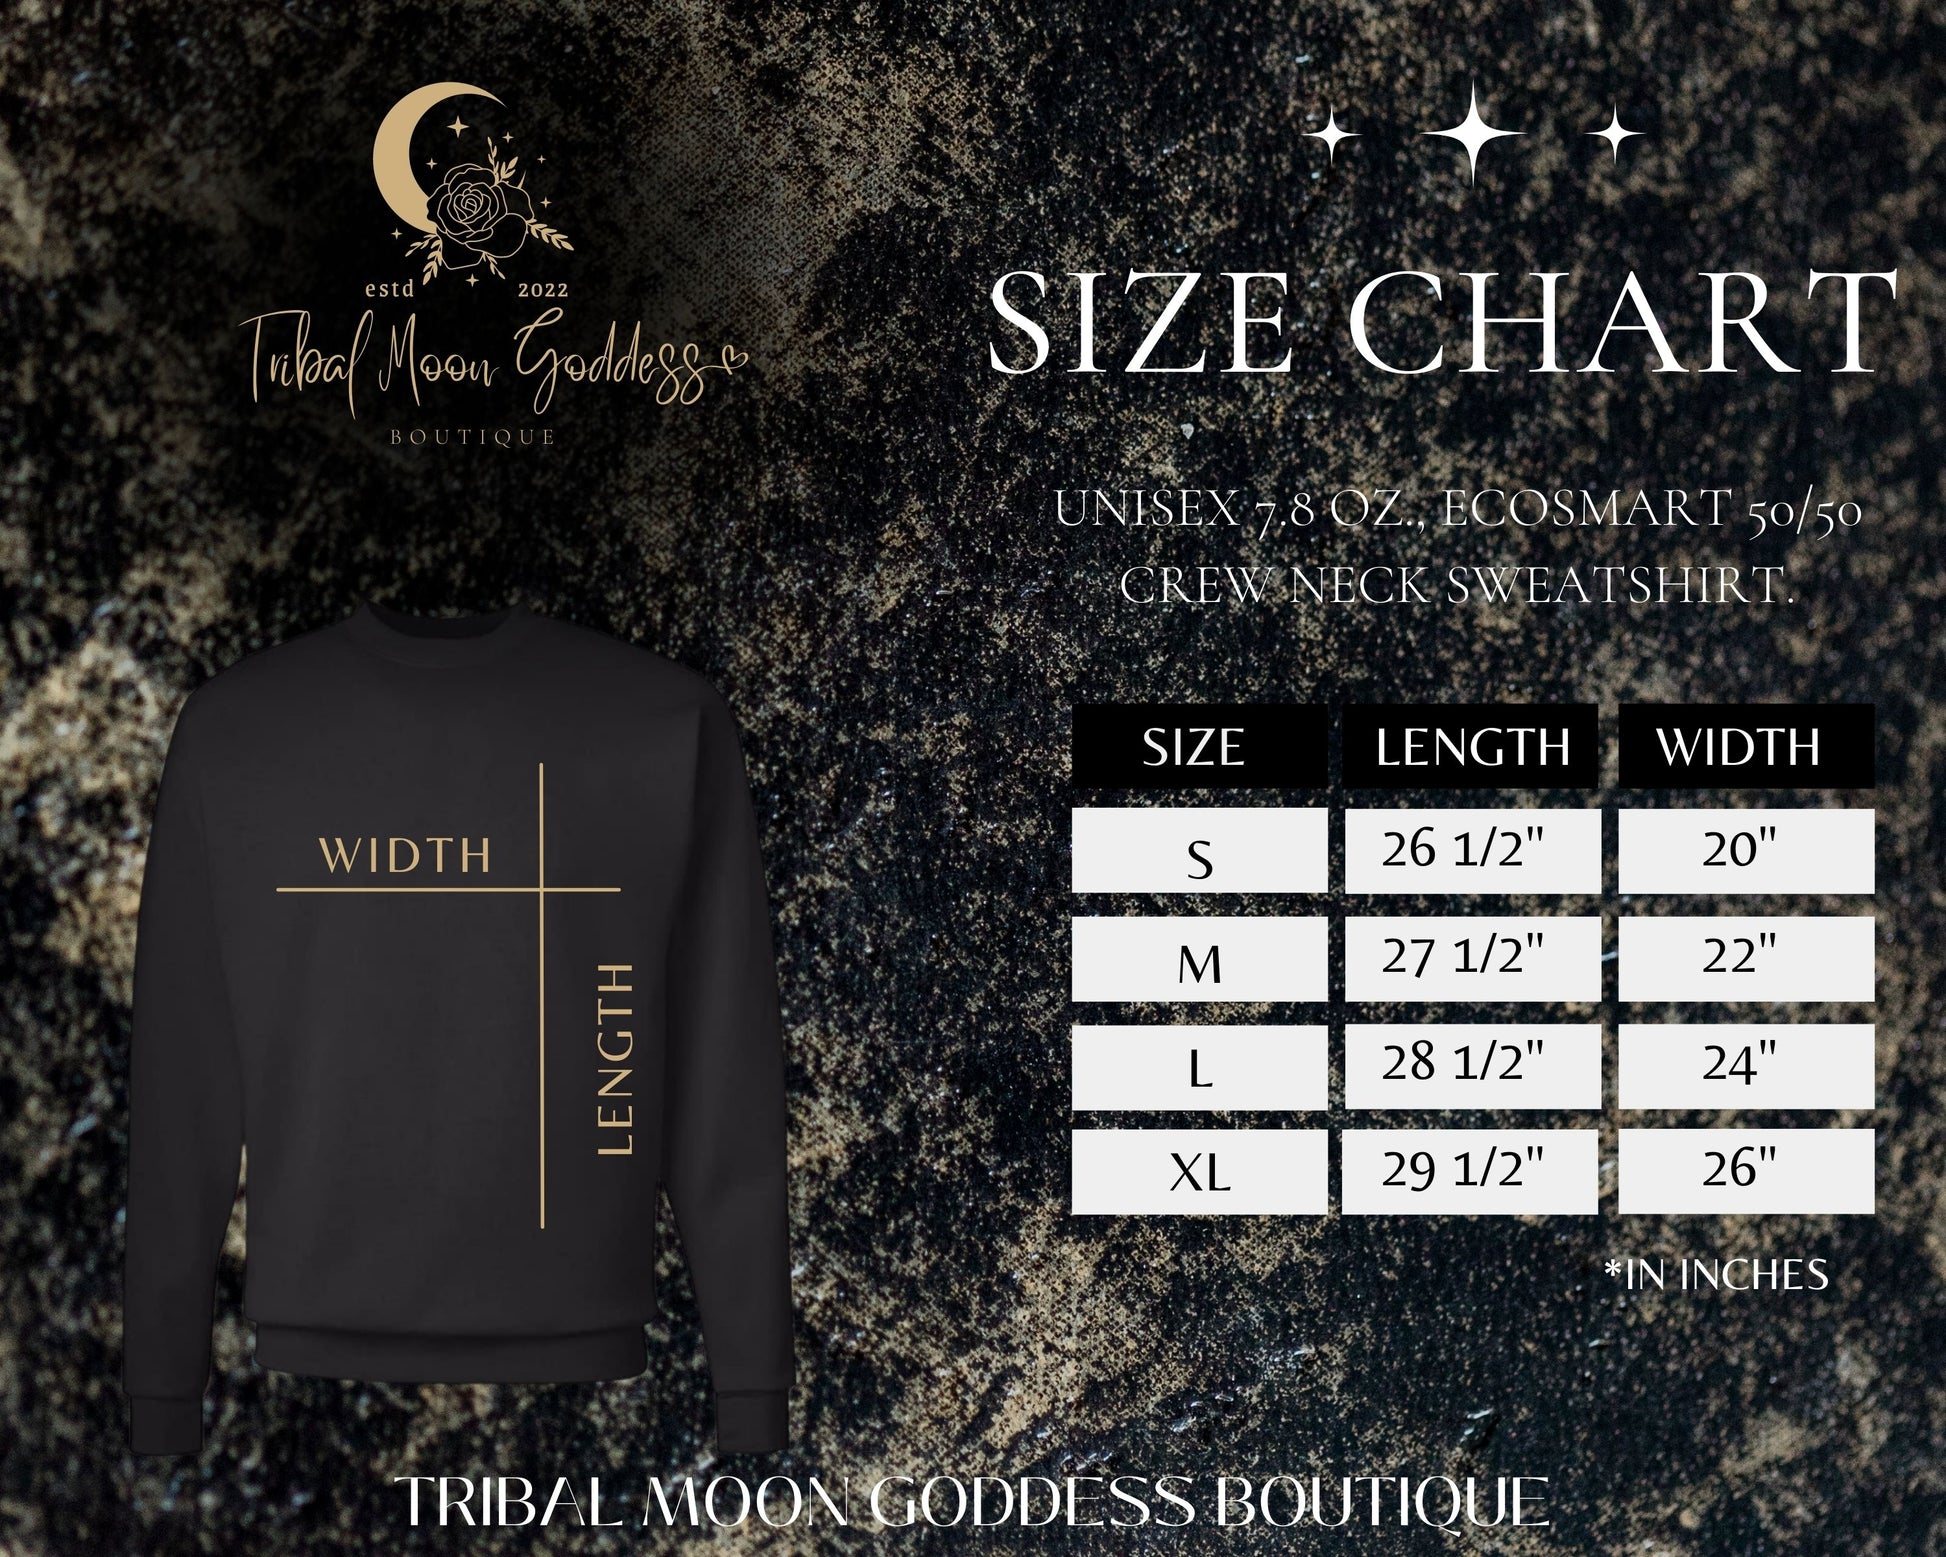 Women's Bad Witch Vibes Black Crewneck Sweater Size Guide